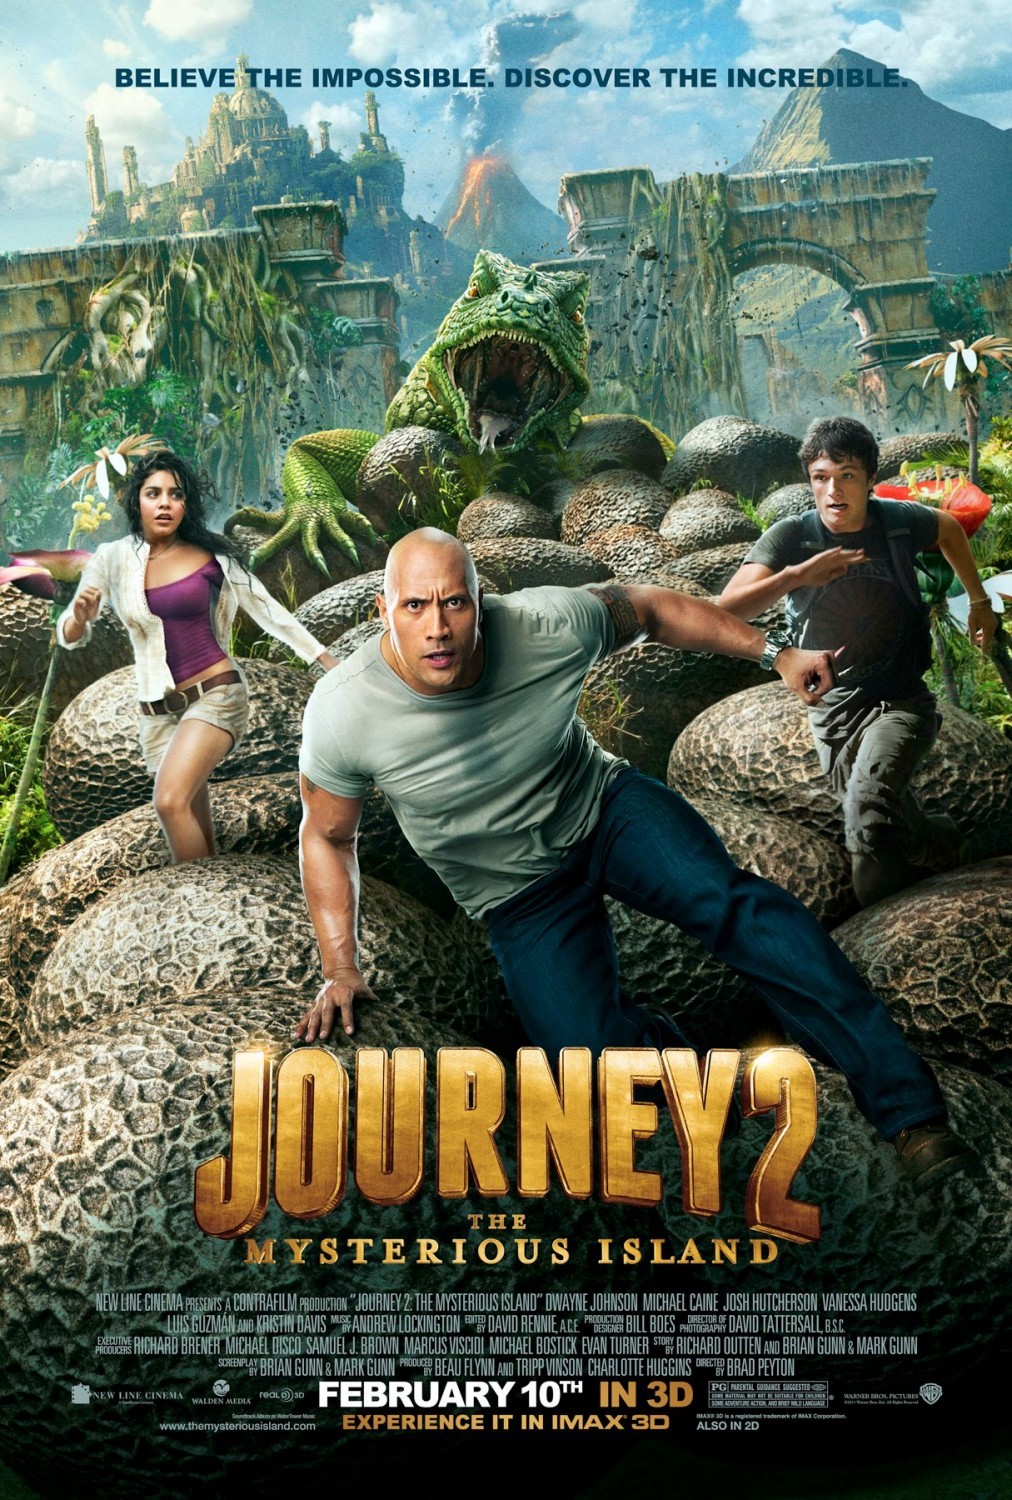 Journey 2 The Mysterious Island (2012) 480p BluRay Hindi ORG Dual Audio Movie MSubs [450MB]